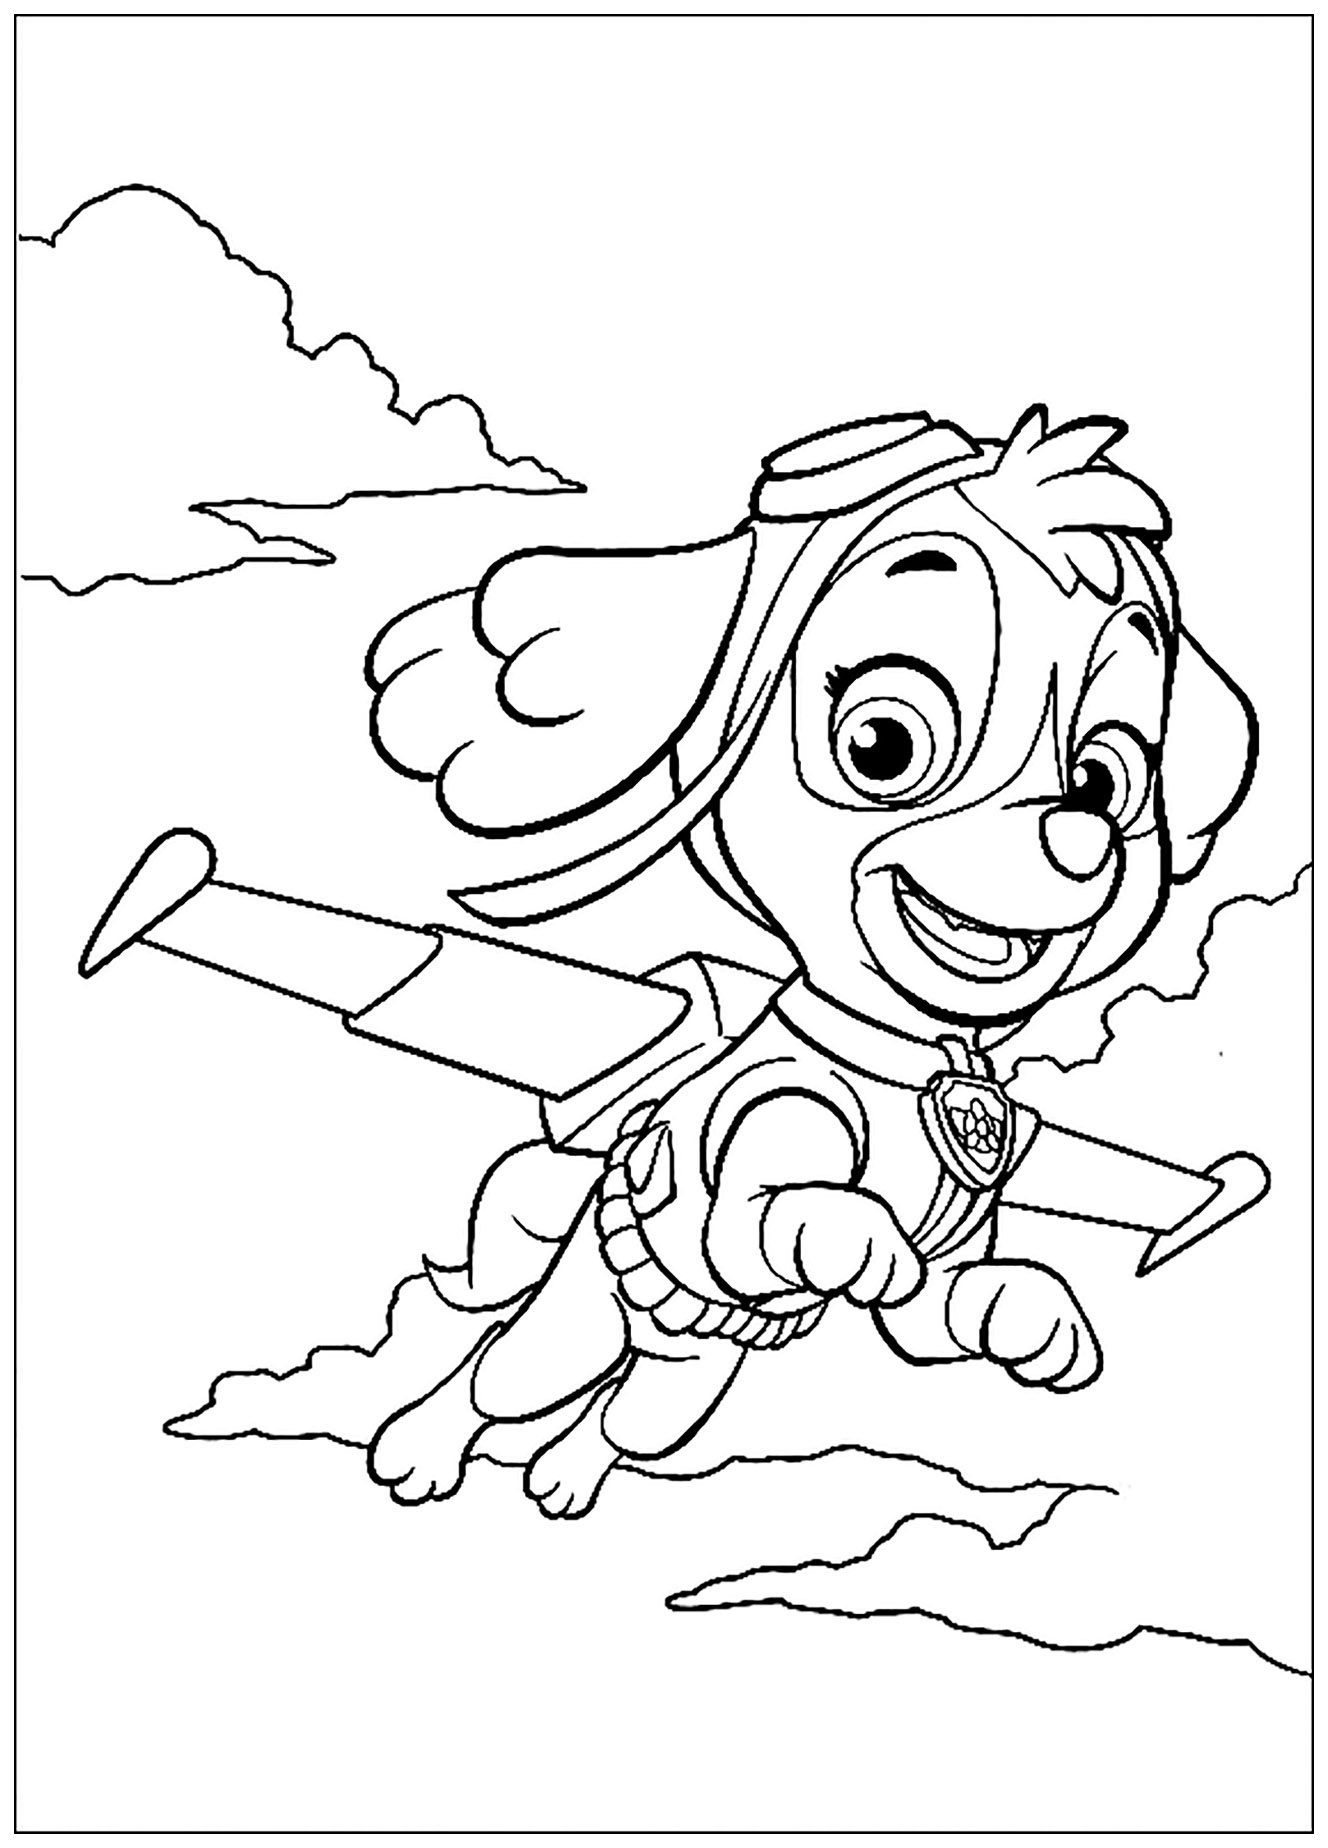 Paw Patrol Coloring Pages FREE Printable 25